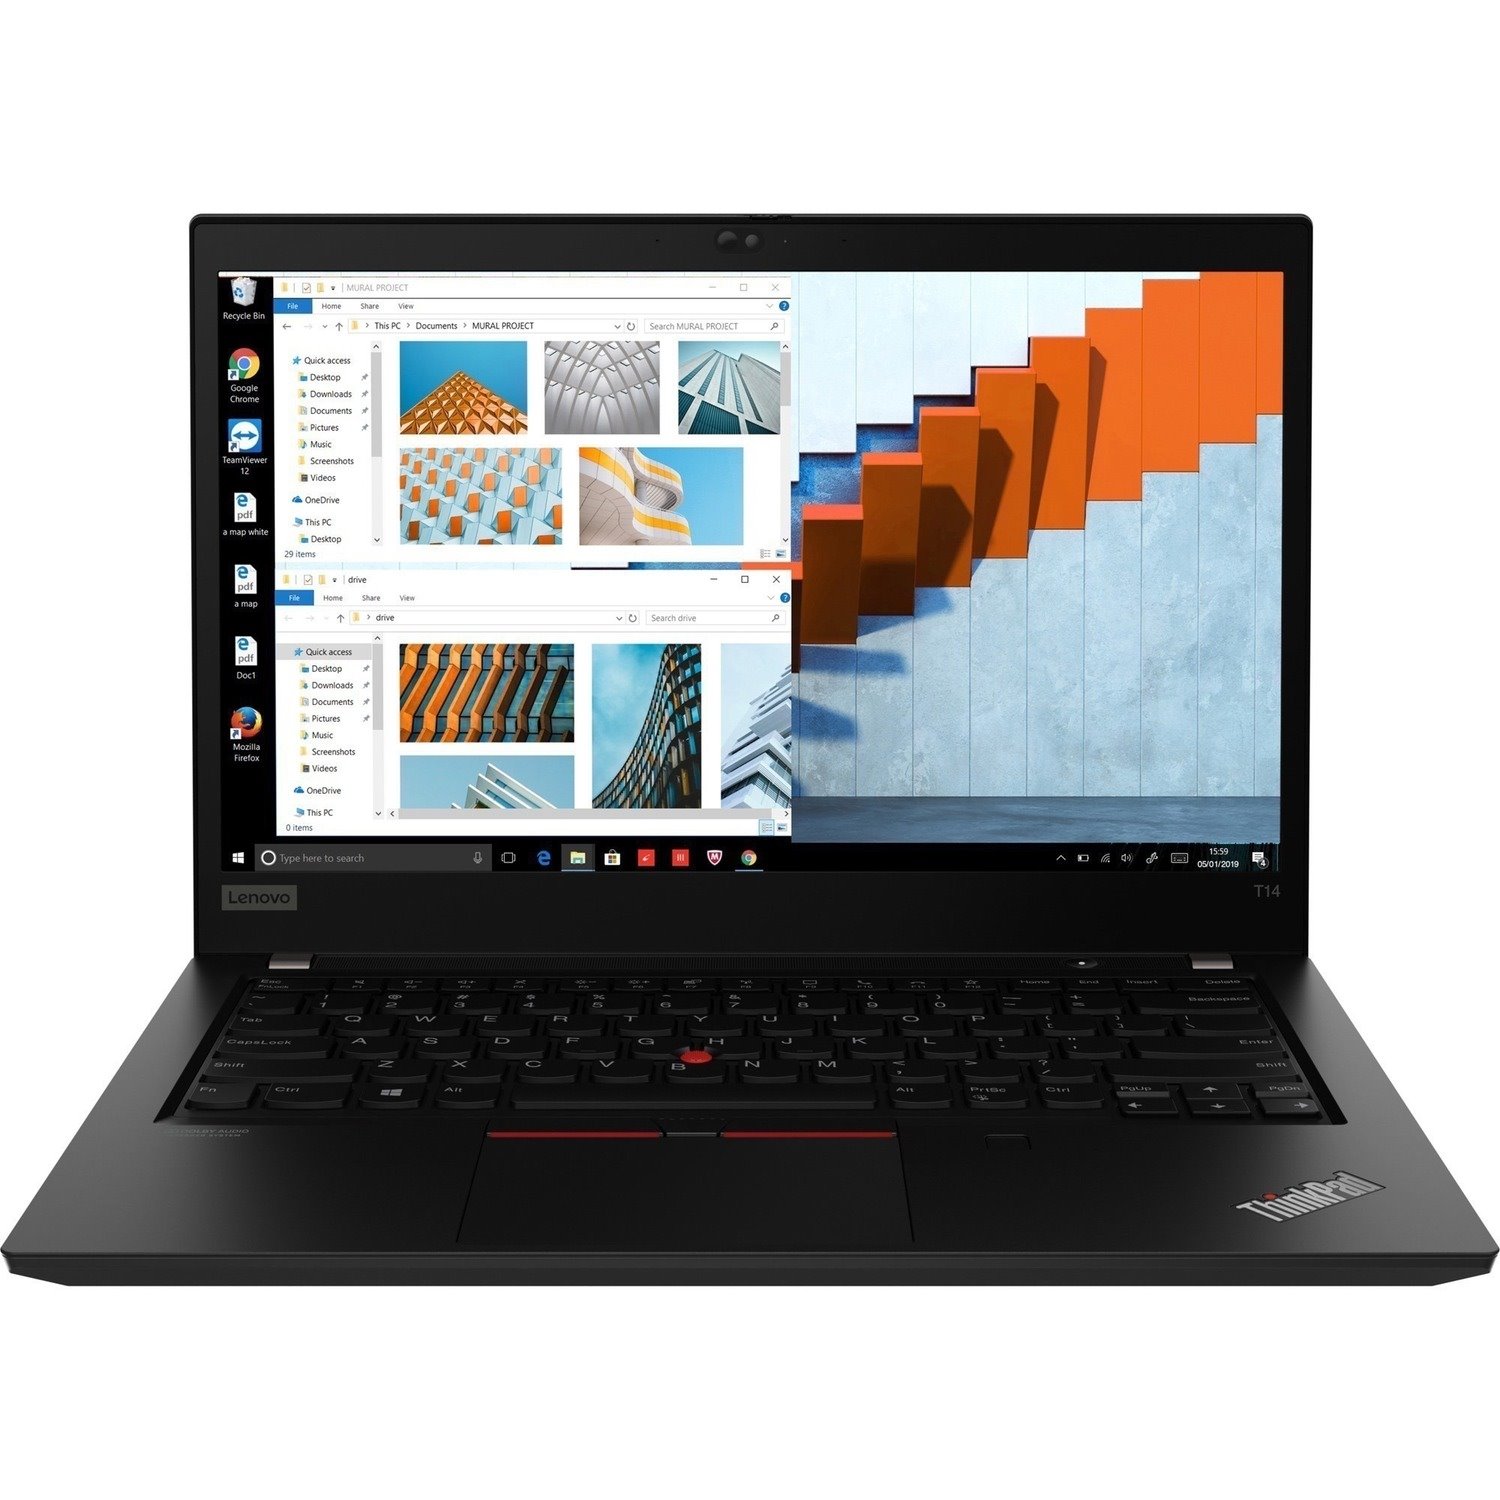 Lenovo ThinkPad T14 Gen 2 20W000T6US 14" Touchscreen Notebook - Full HD - 1920 x 1080 - Intel Core i7 11th Gen i7-1185G7 Quad-core (4 Core) 3GHz - 16GB Total RAM - 512GB SSD - no ethernet port - not compatible with mechanical docking stations